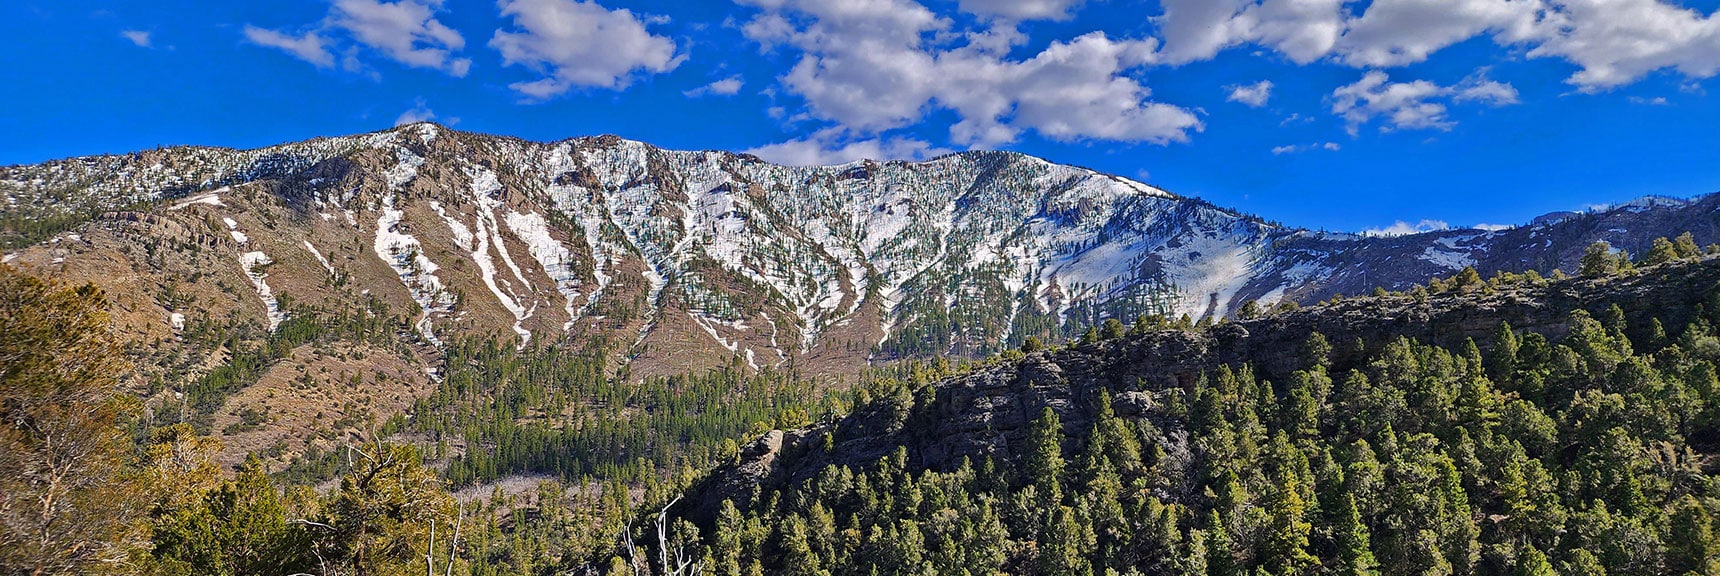 Harris Mountain Across Kyle Canyon from Eagle's Nest Loop | Eagles Nest Loop | Mt Charleston Wilderness | Spring Mountains, Nevada